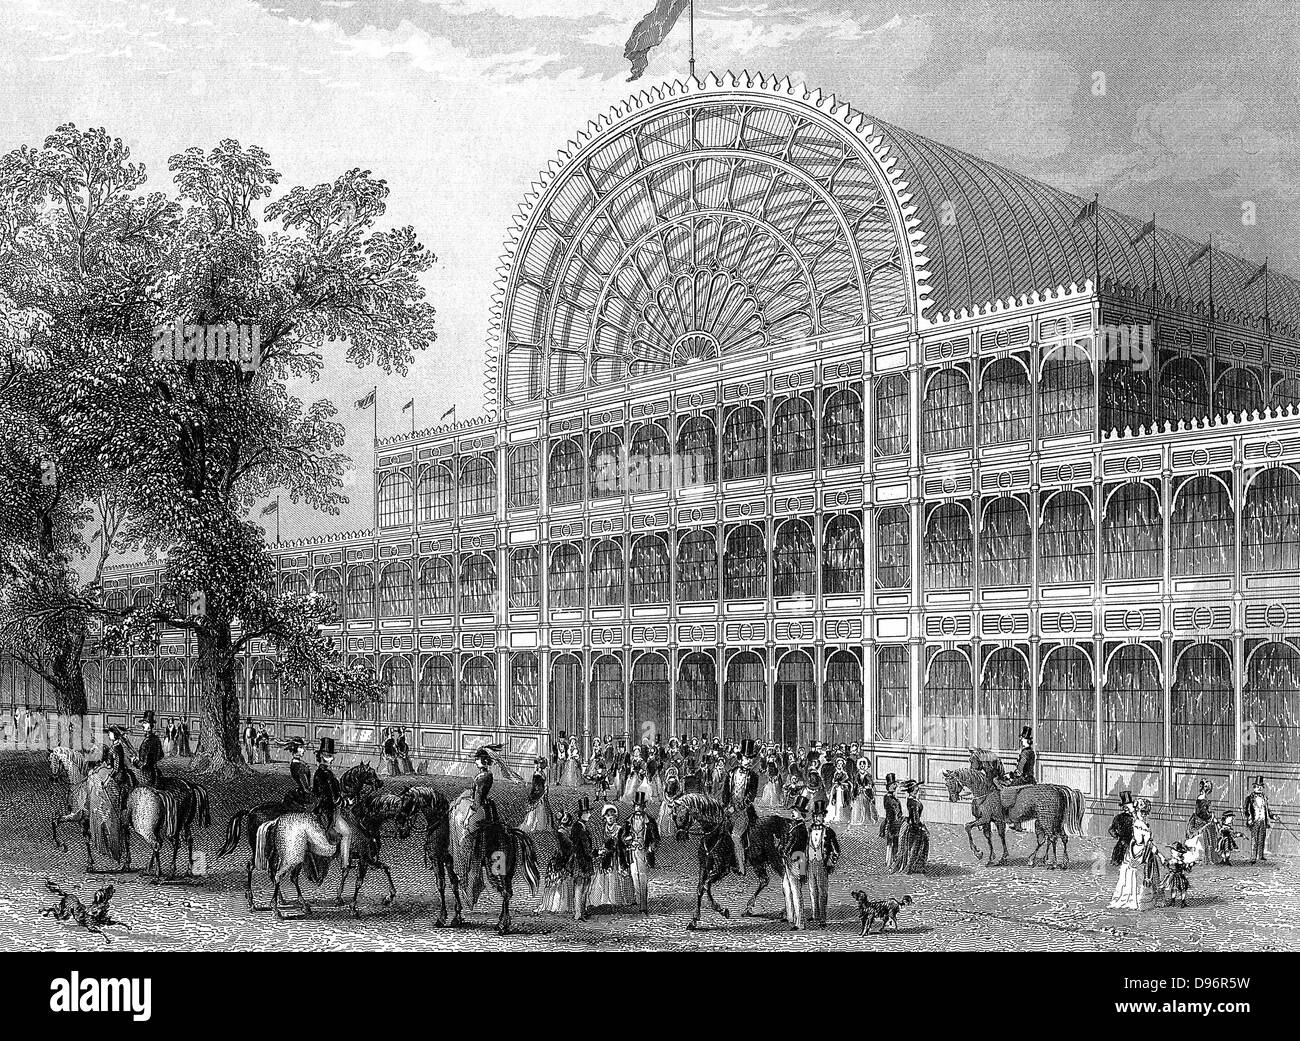 Exterior of the North Transept of the Crystal Palace, London, at the time of the Great Exhibition of 1851.  Steel engraving 1851 Stock Photo